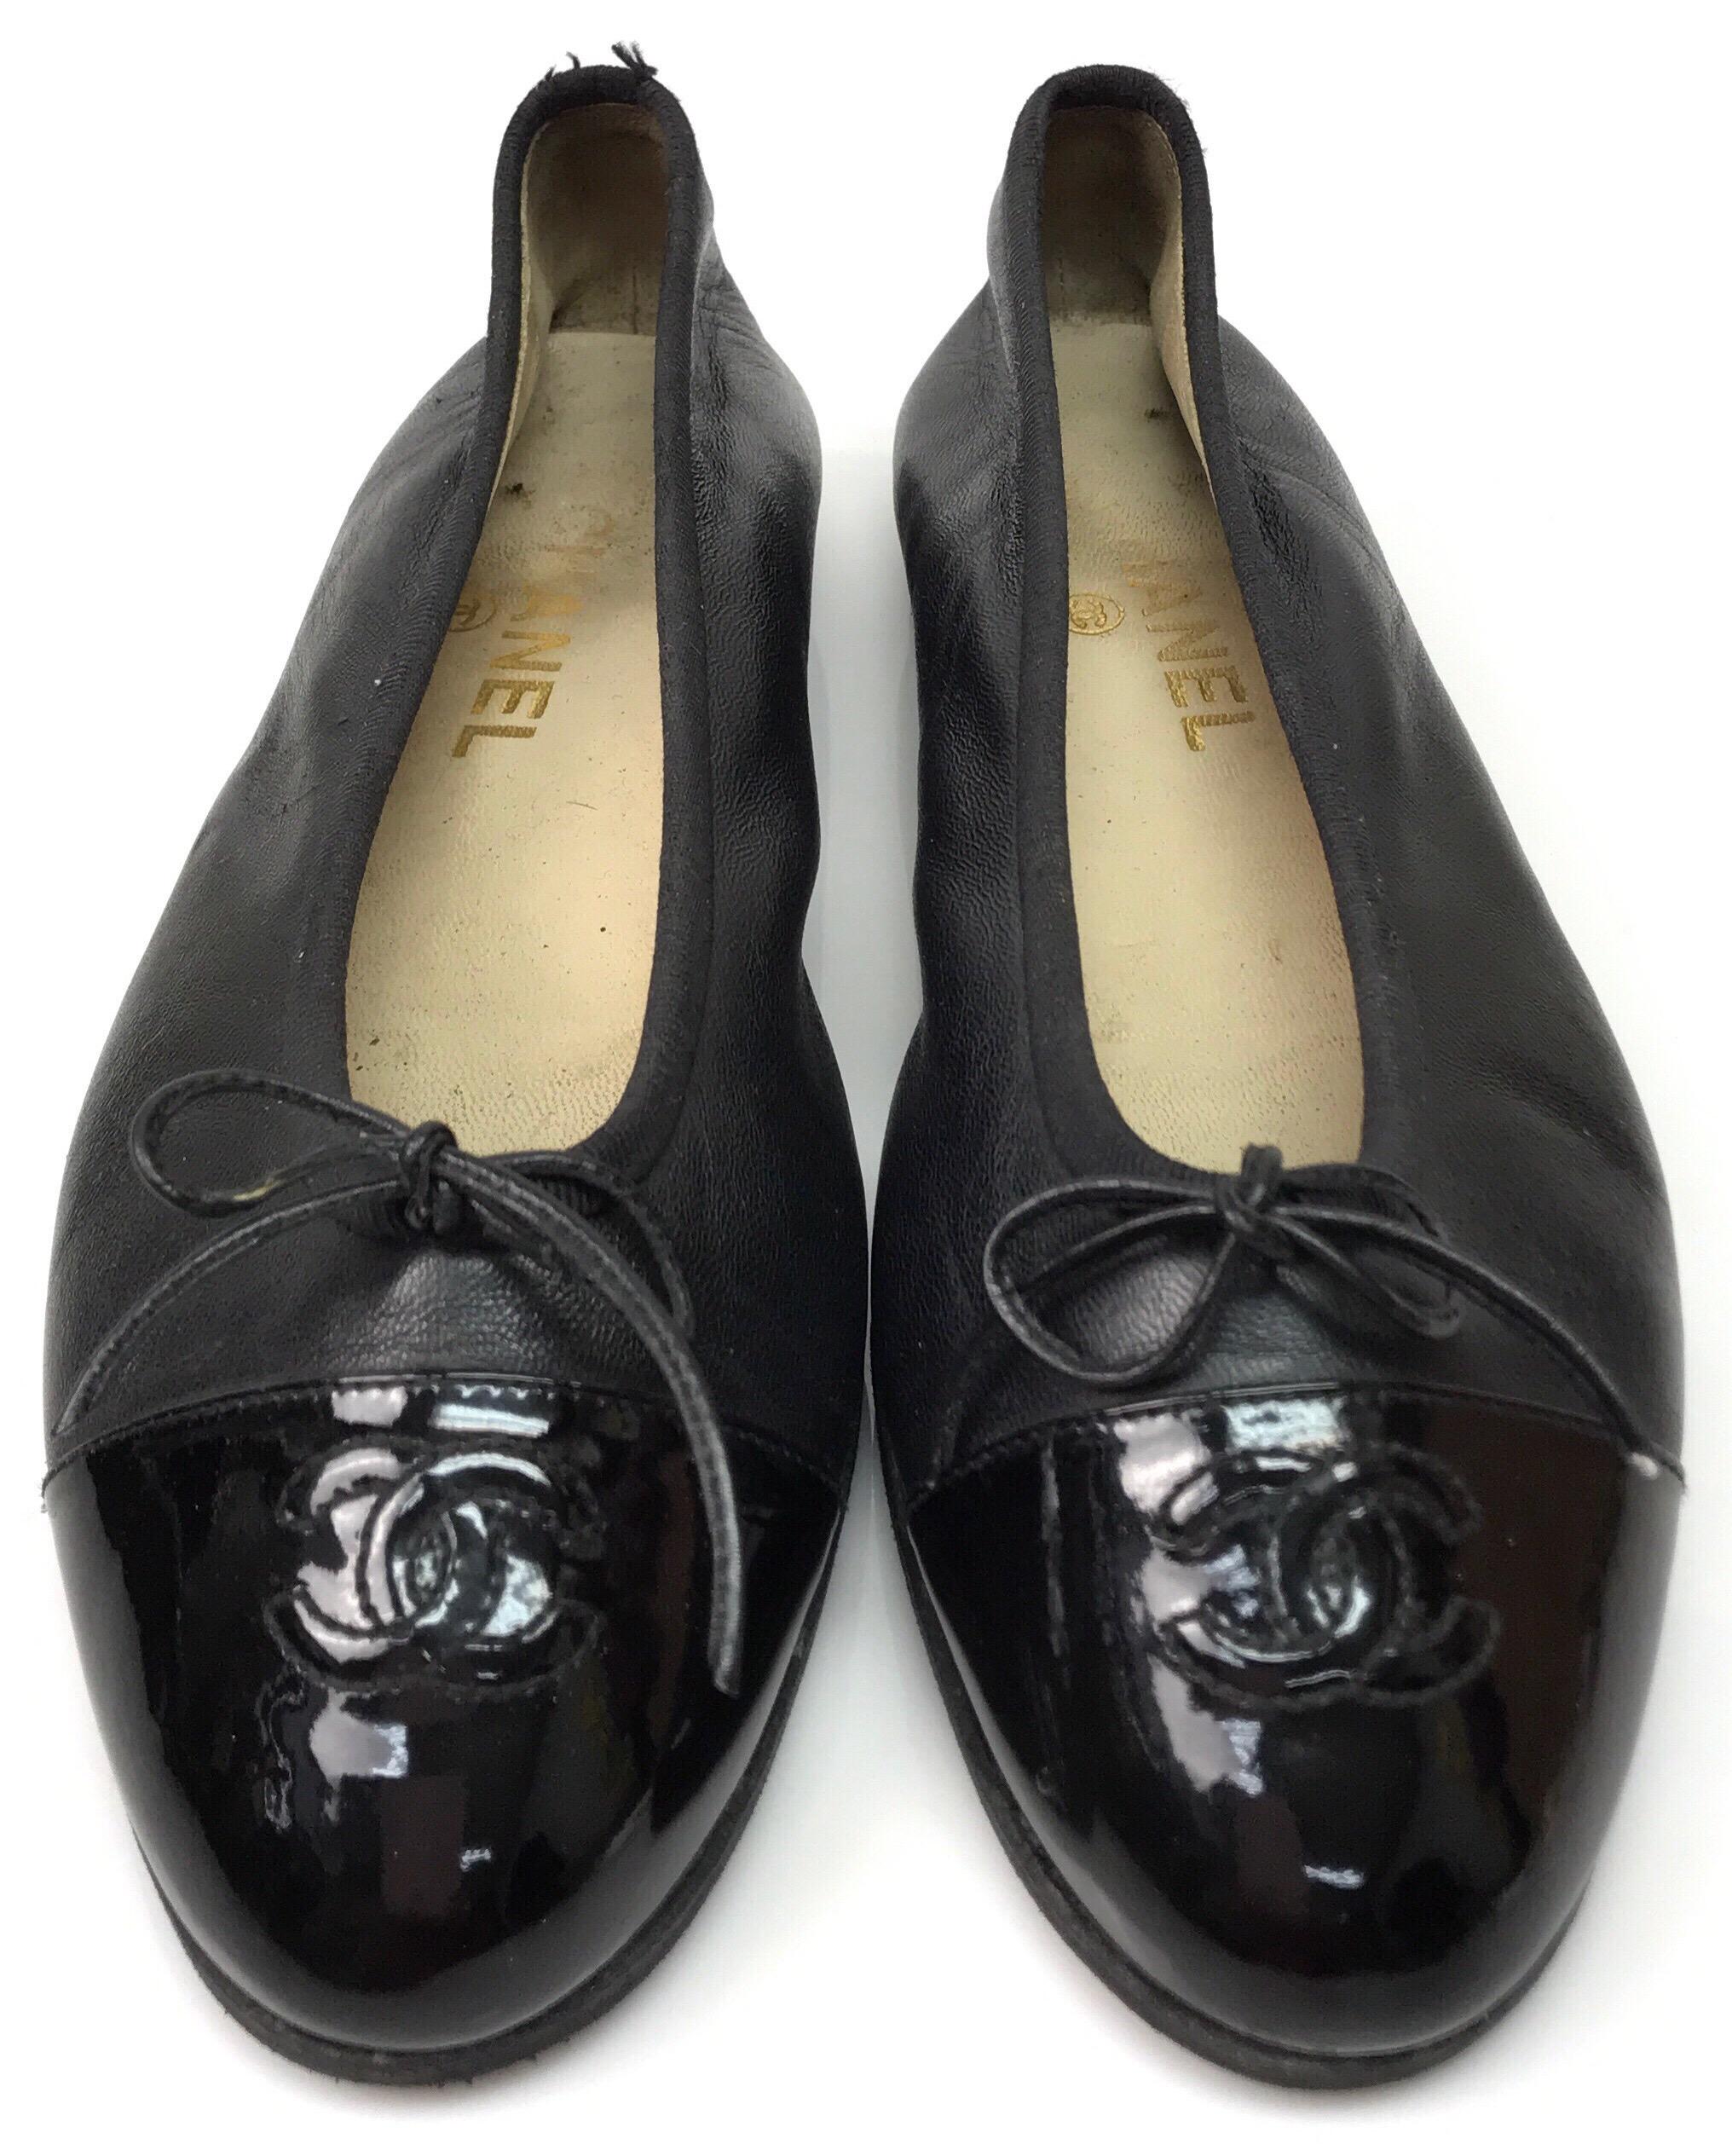 Chanel Black Leather Ballet Flats w/ Patent Toe & Bow-38.5. These adorable Chanel ballet flats are in good condition. They show wear consistent with age. The leather is slightly stretched and the bottoms are slightly rubbed off, the heel has been